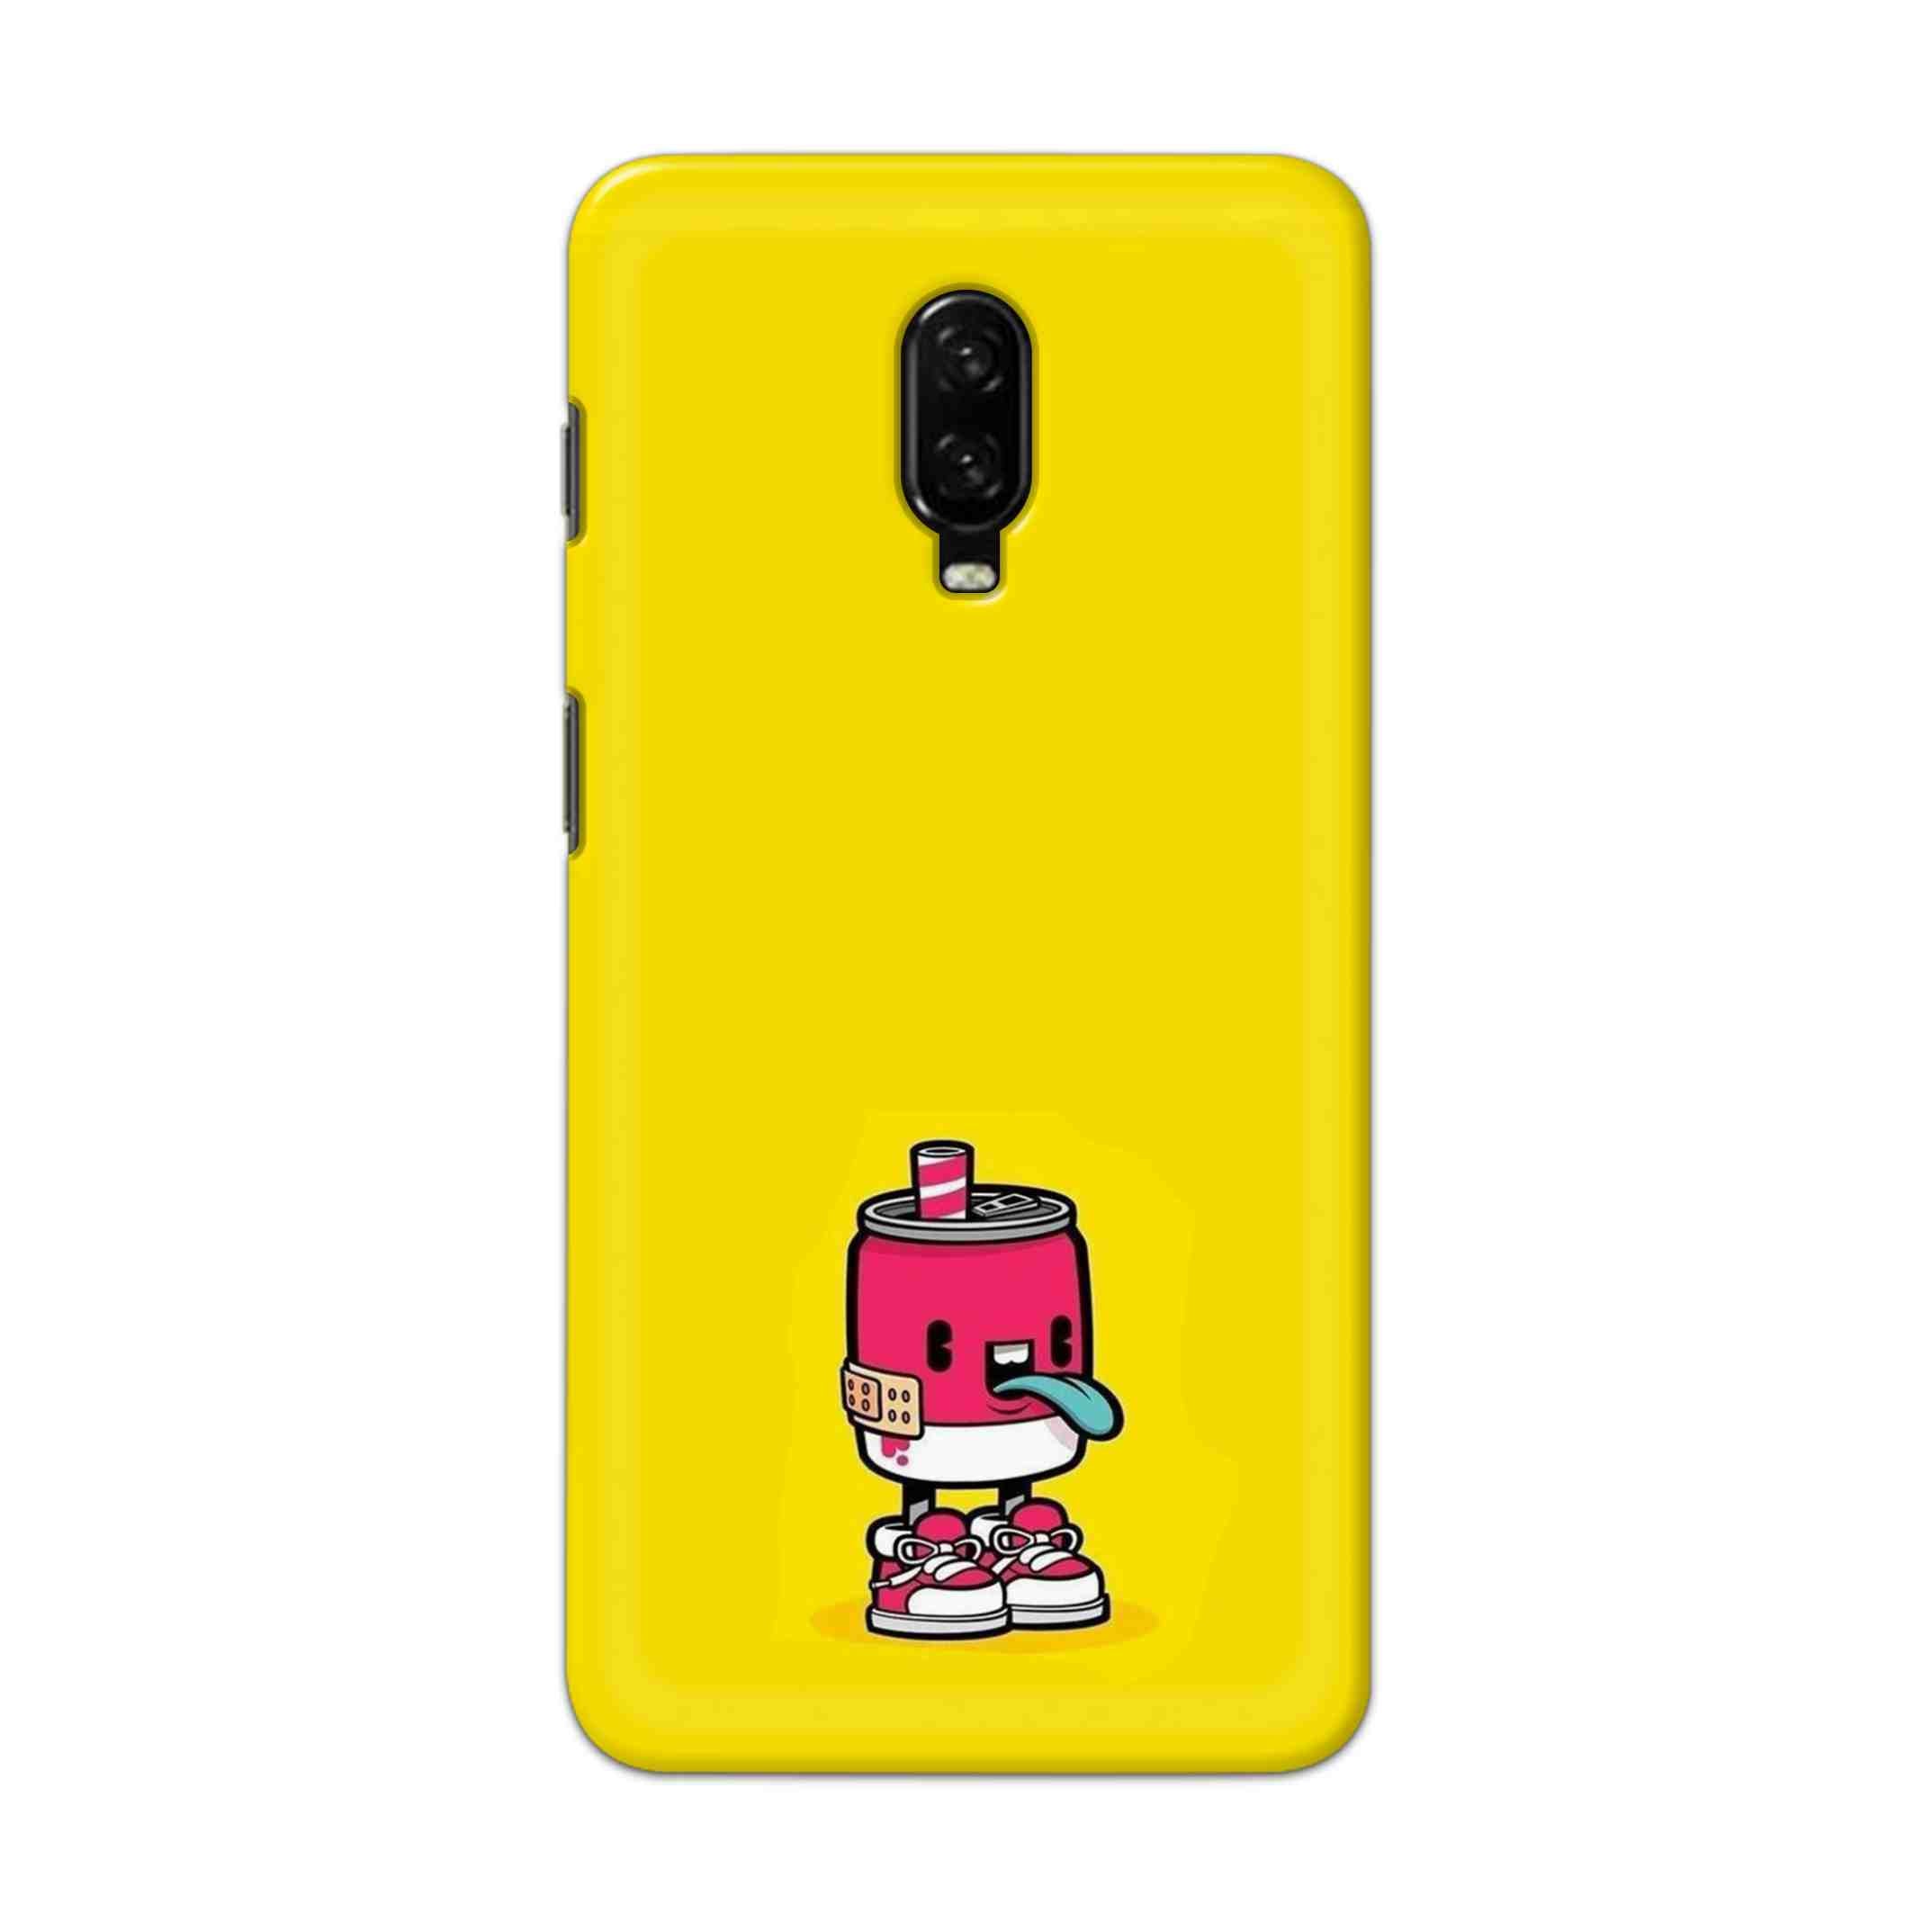 Buy Juice Cane Hard Back Mobile Phone Case Cover For OnePlus 6T Online